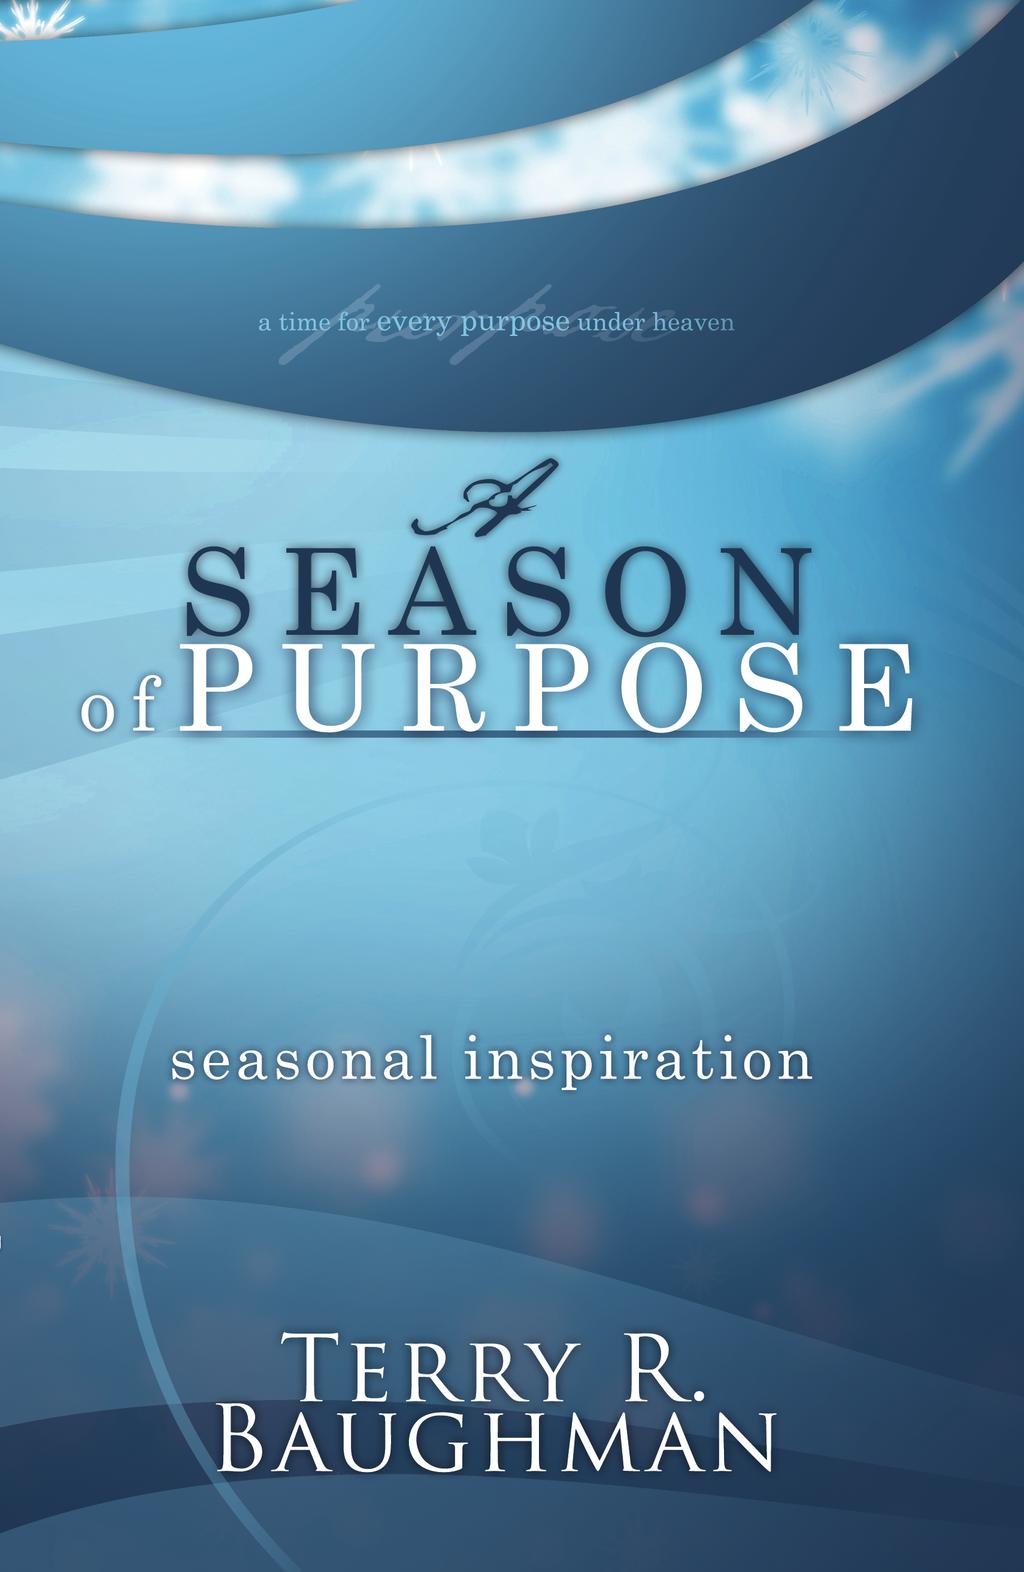 The Inspirational Writings of Terry & Gayla Baughman Seasonal Inspiration: A Season of Purpose. This is the first of four books in the series of Seasonal Inspiration.